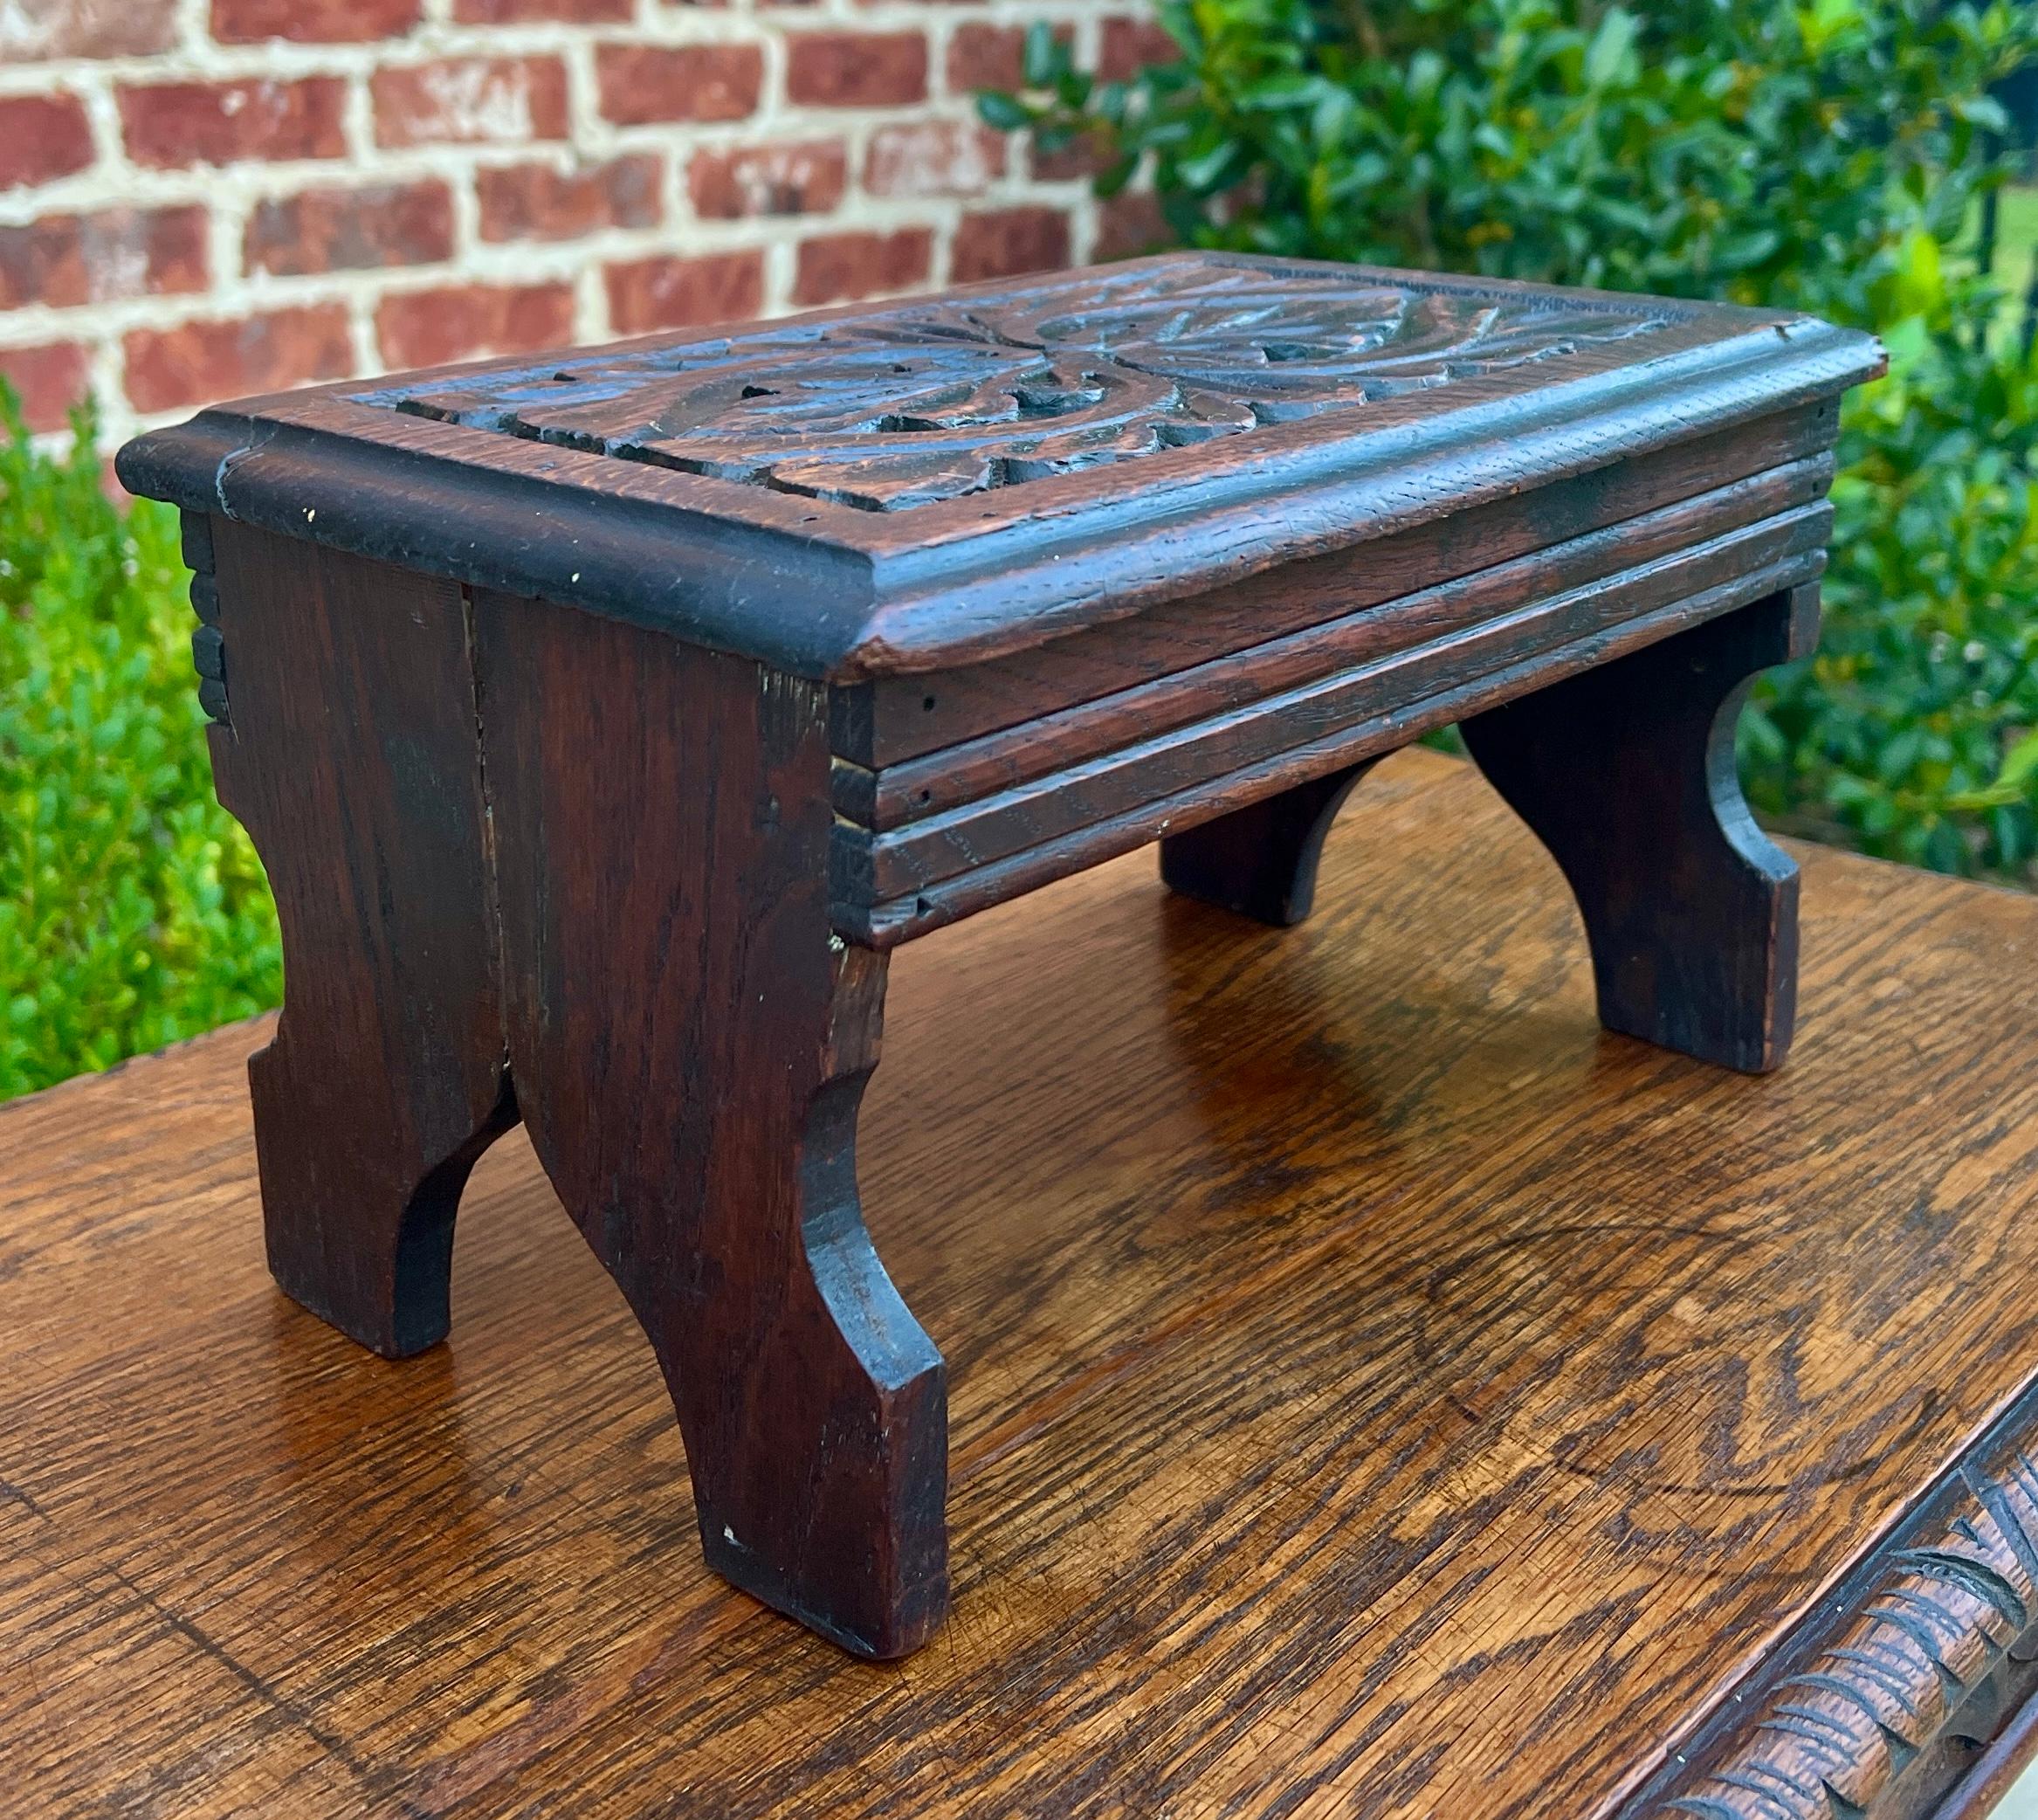 Antike englische Kettle Stand Small Footstool Bench Carved Oak c. 1920s-30s (Eichenholz) im Angebot